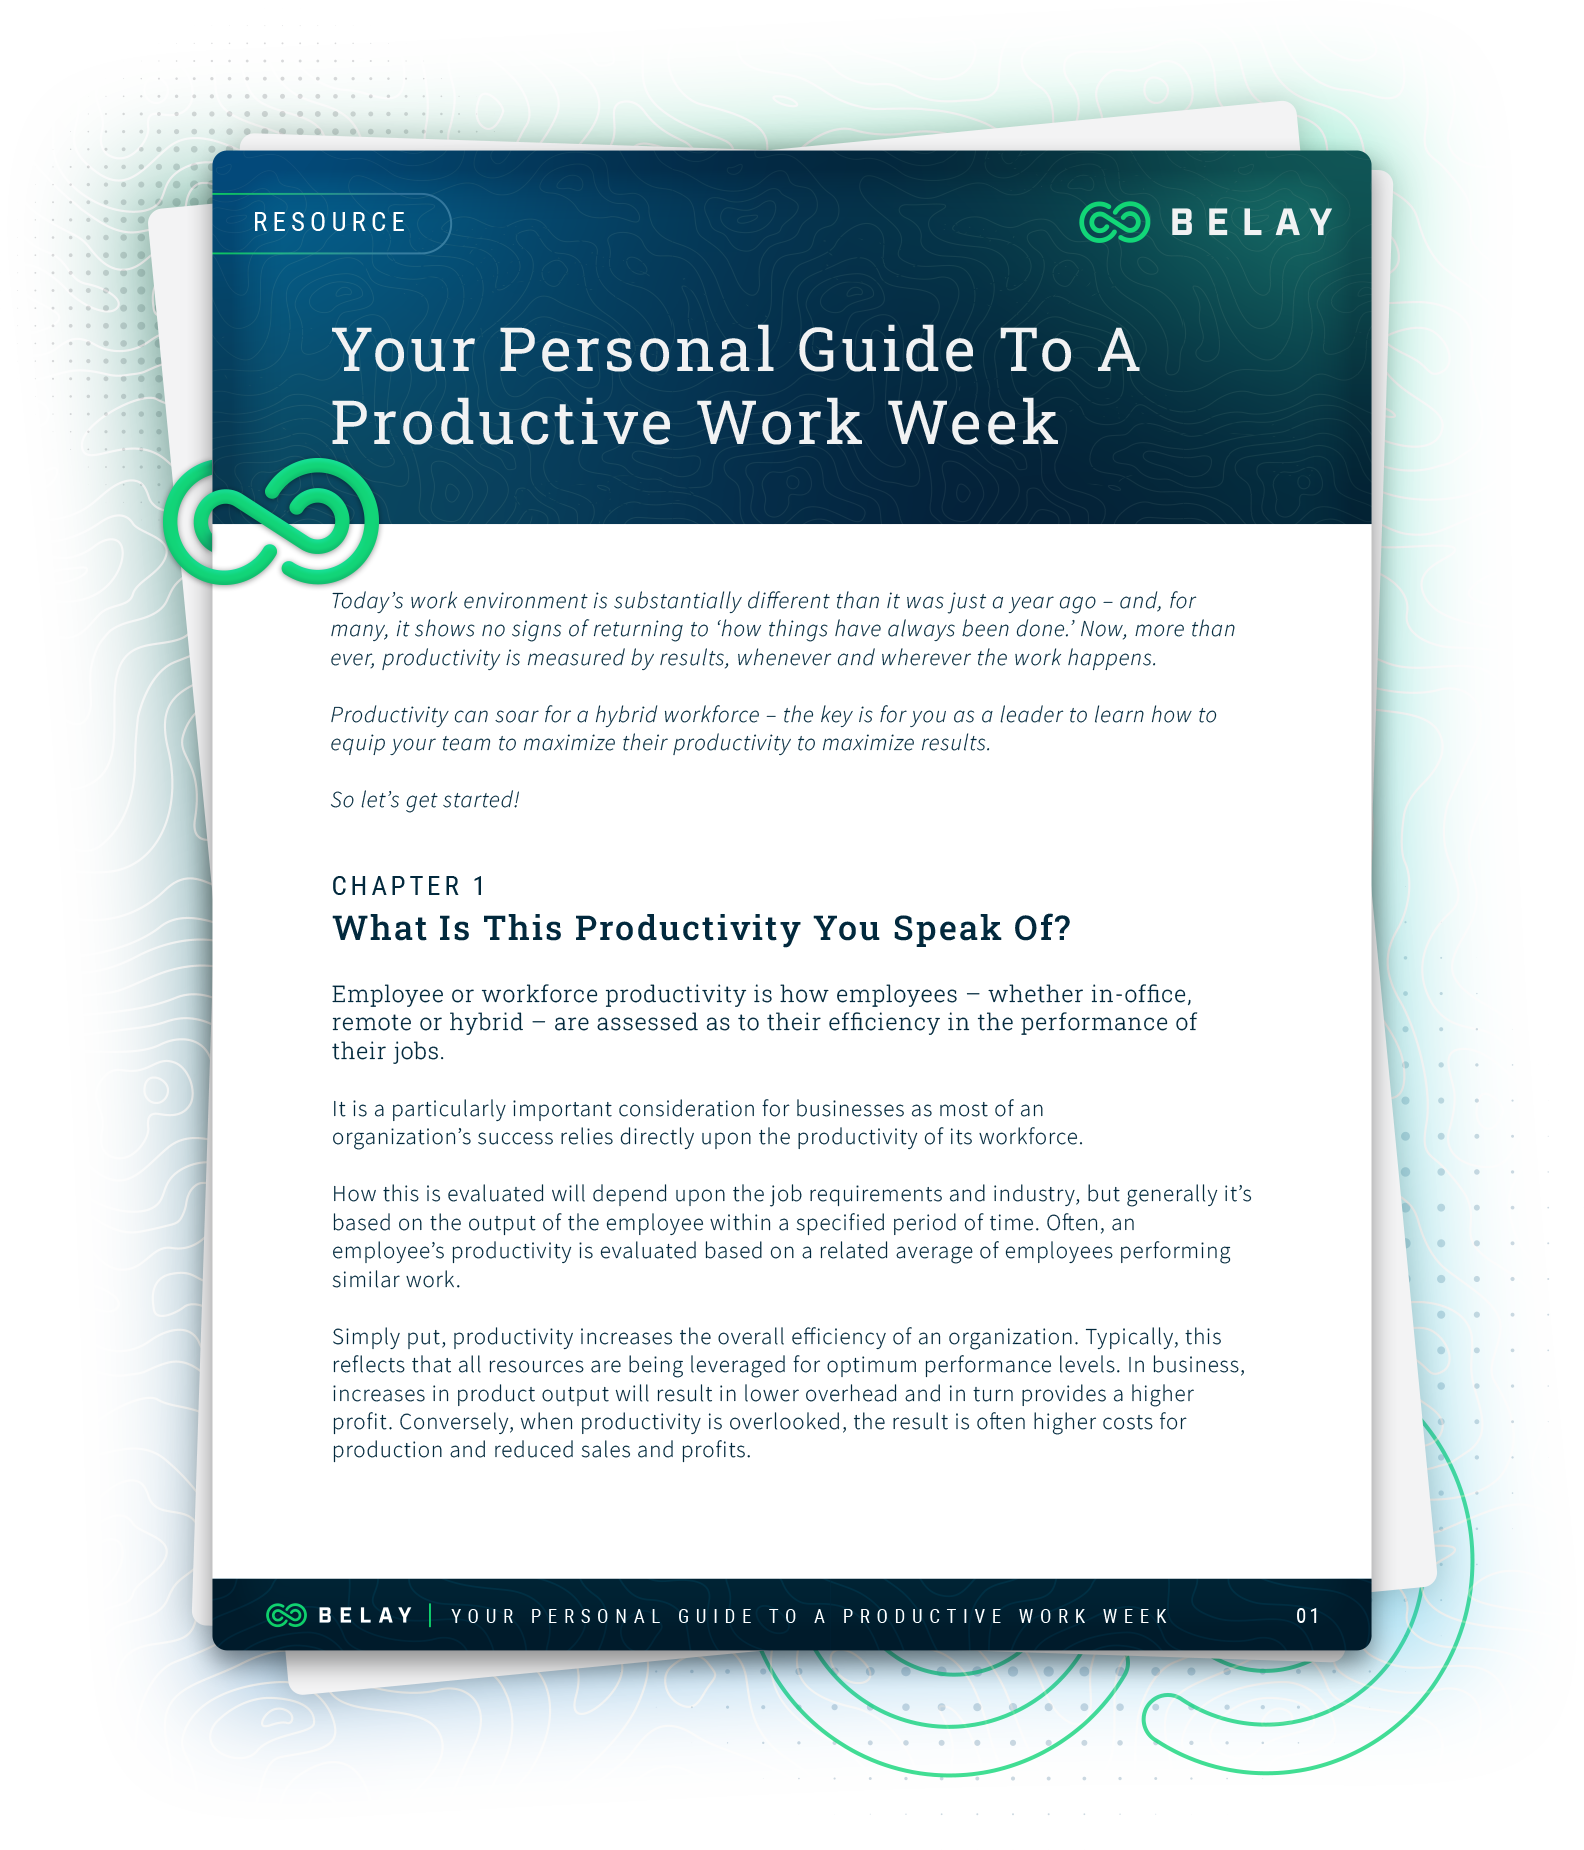 Your Personal Guide To A Productive Work Week